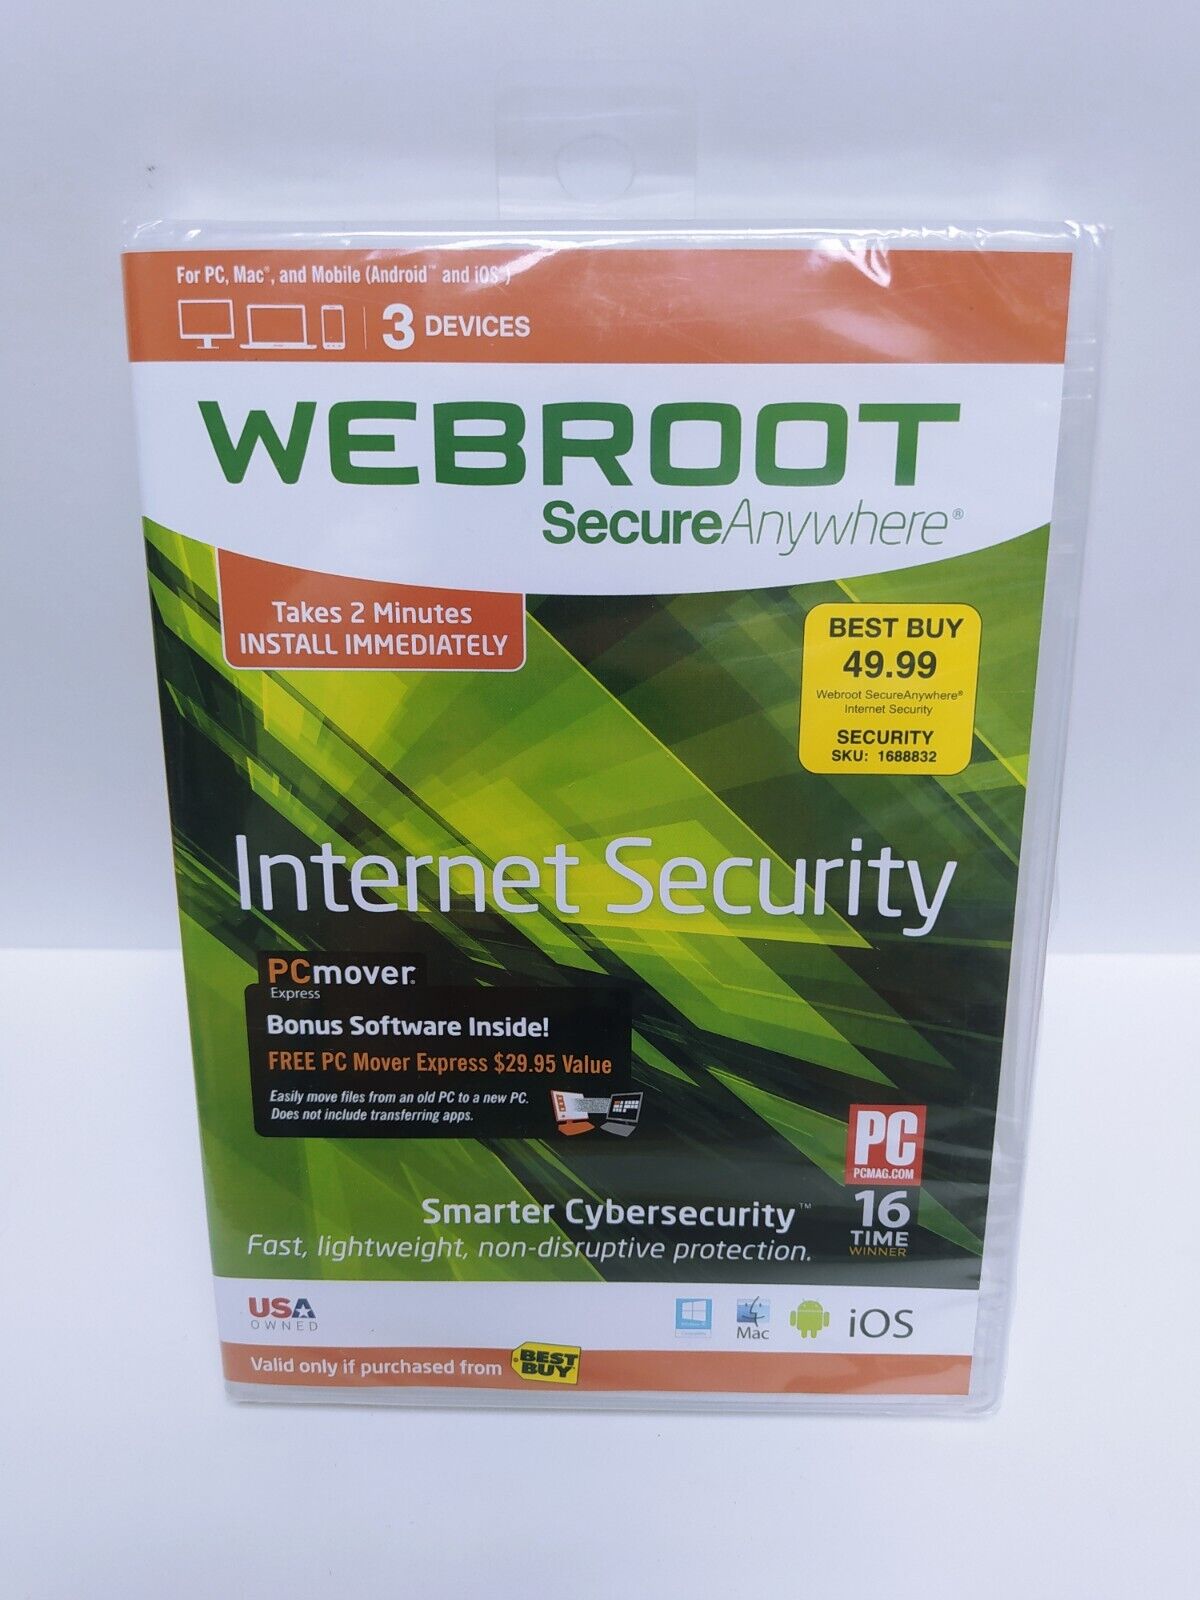 Webroot Secure Anywhere Internet Security 3 Devices for PC, MAC BRAND NEW SEALED